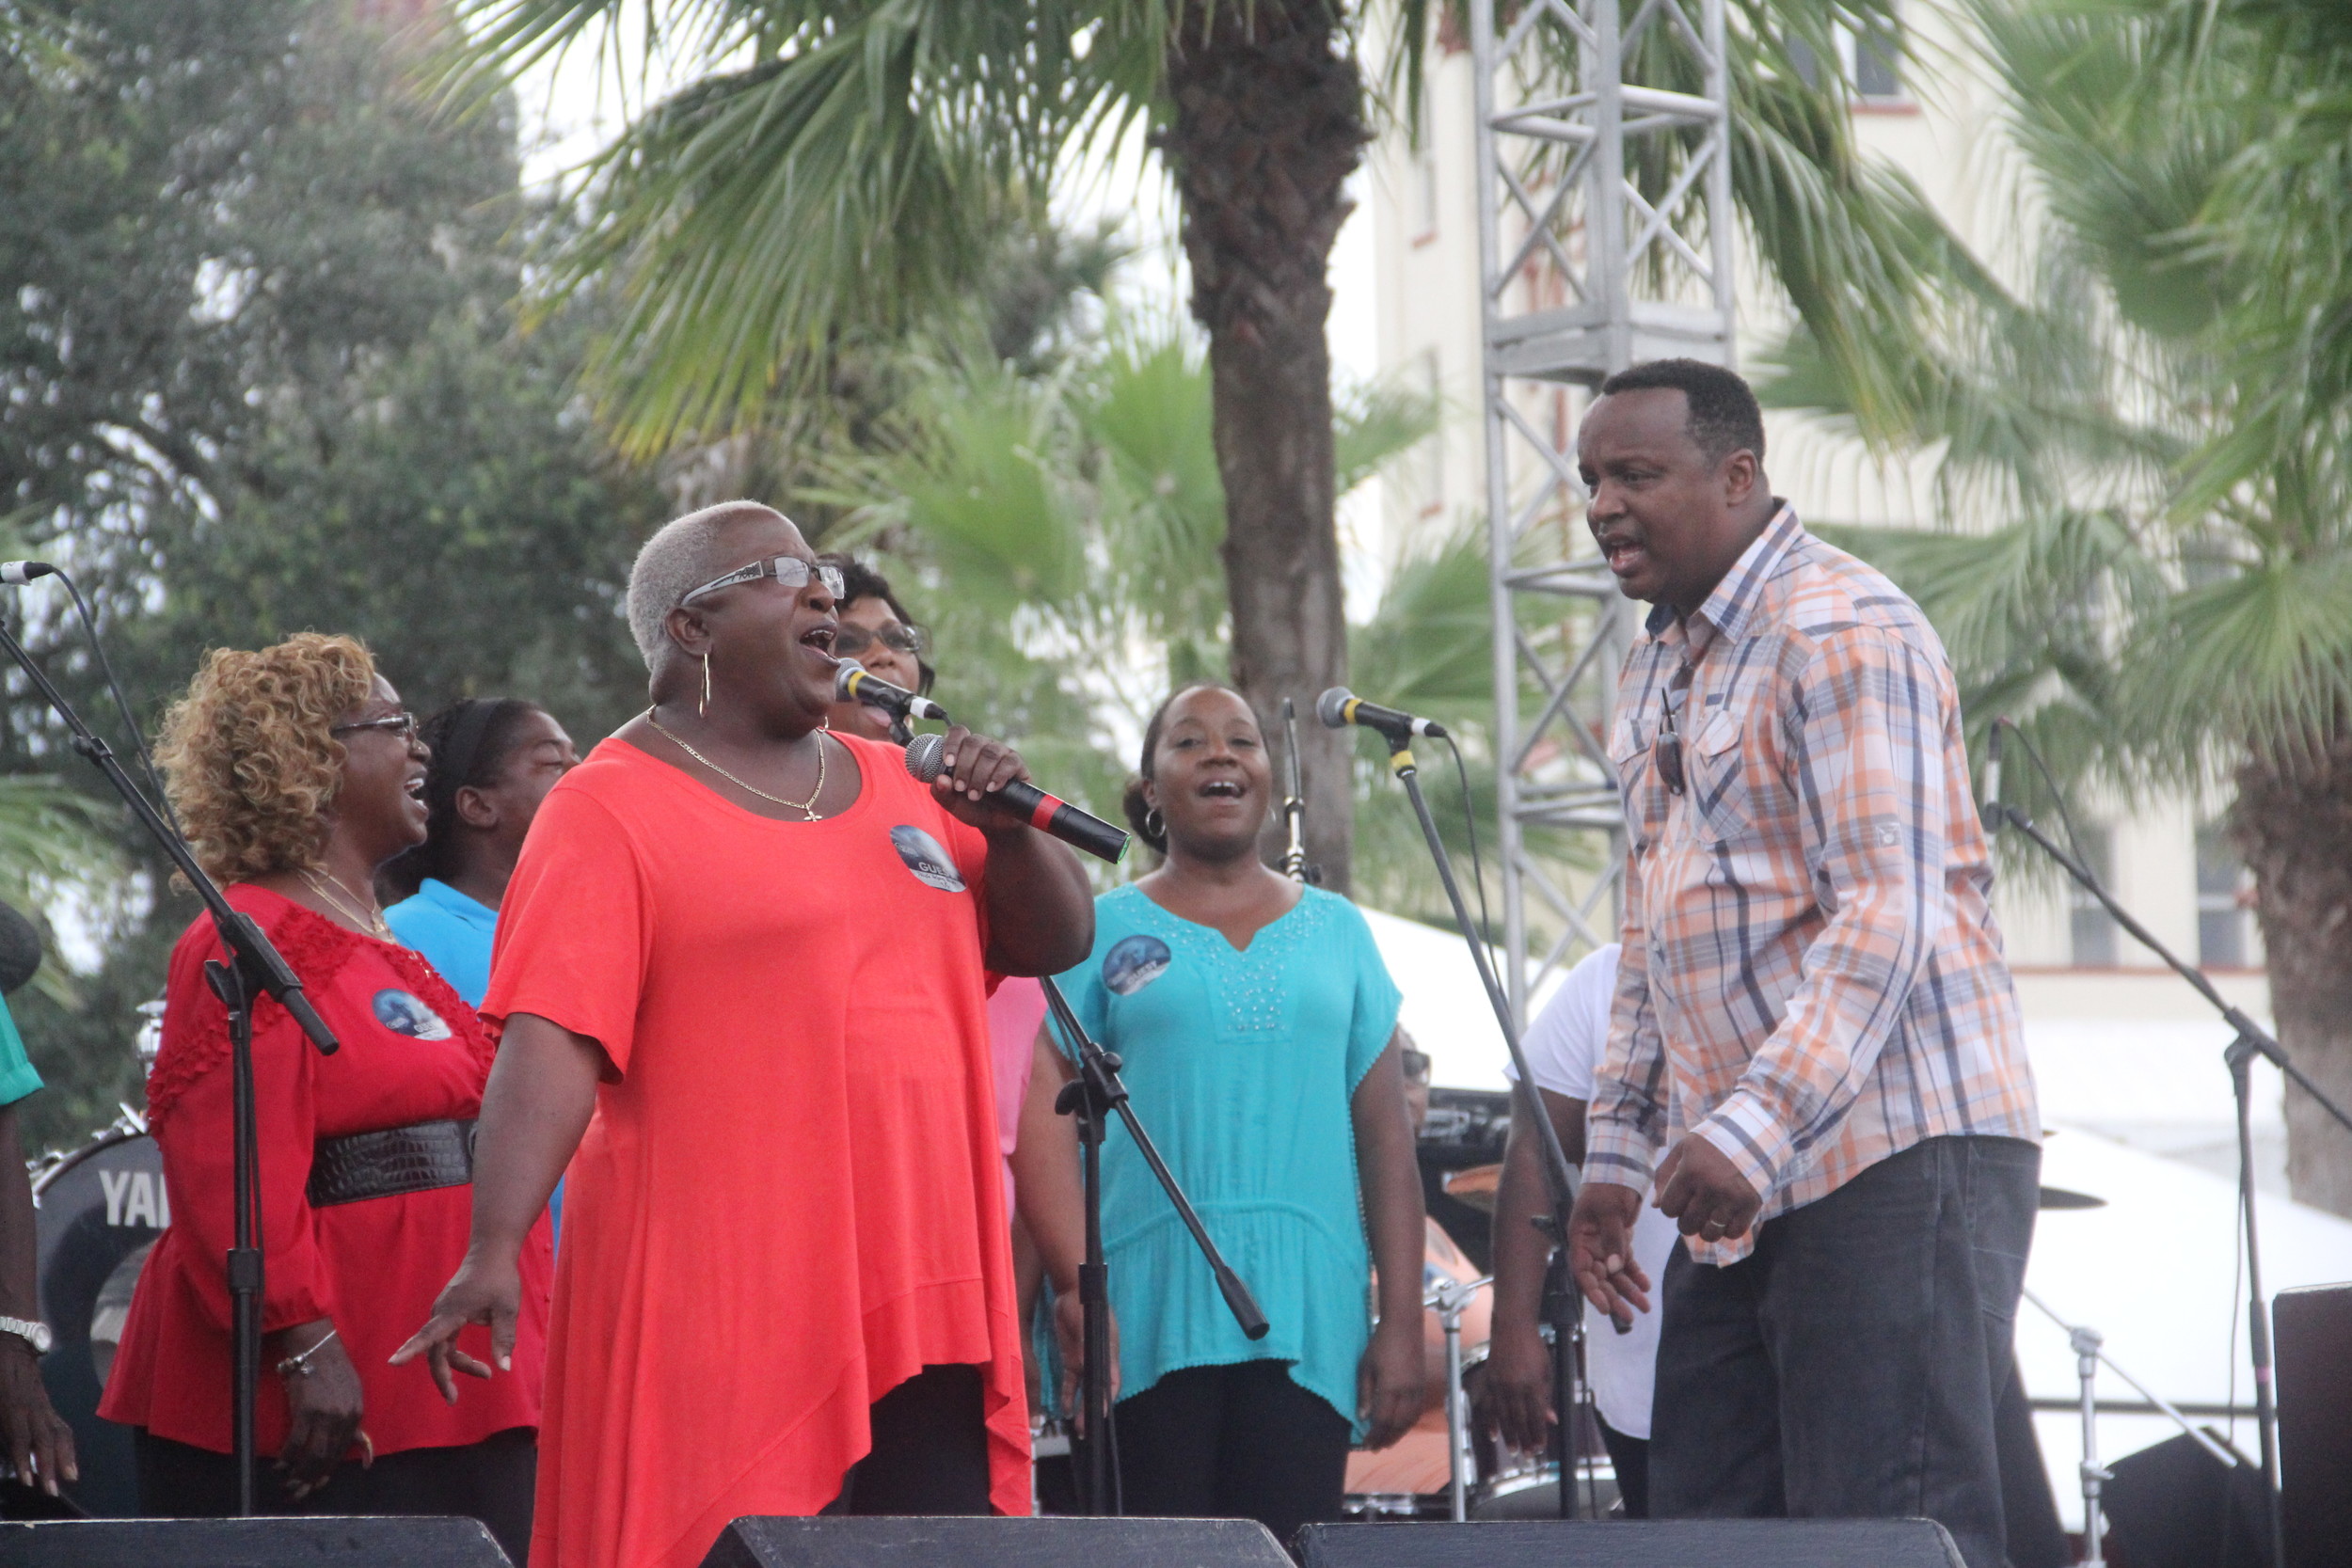 Entertainment on the main stage was kicked off by St. Augustine’s own People Helping People Gospel Choir.